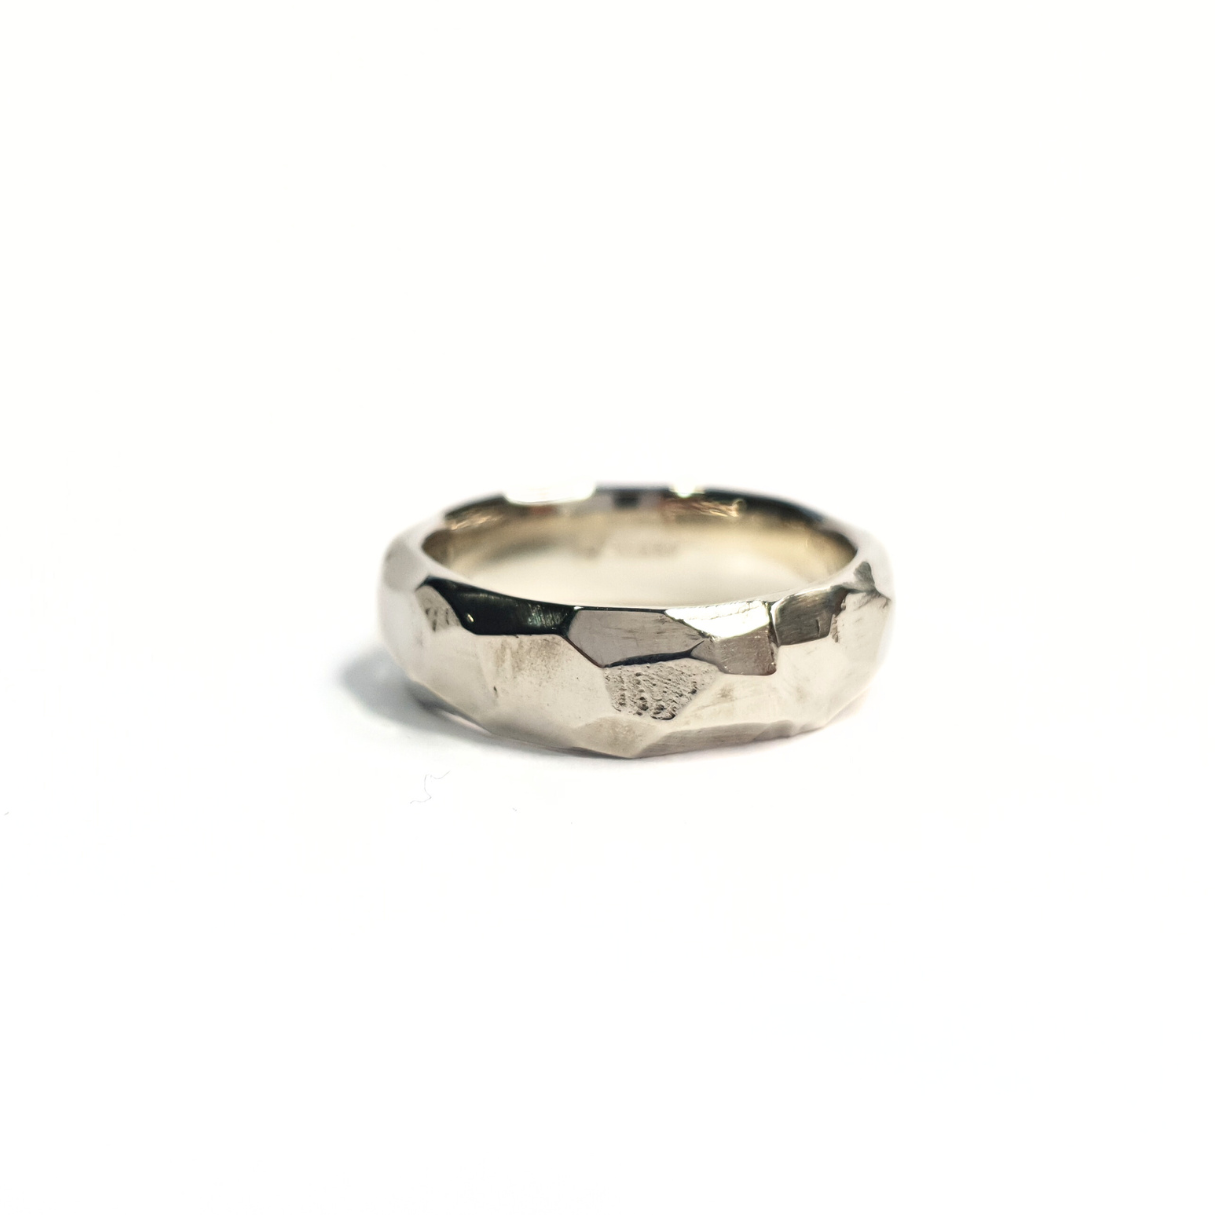 A 9ct white gold rough cut and faceted ring sits against a crisp, white background